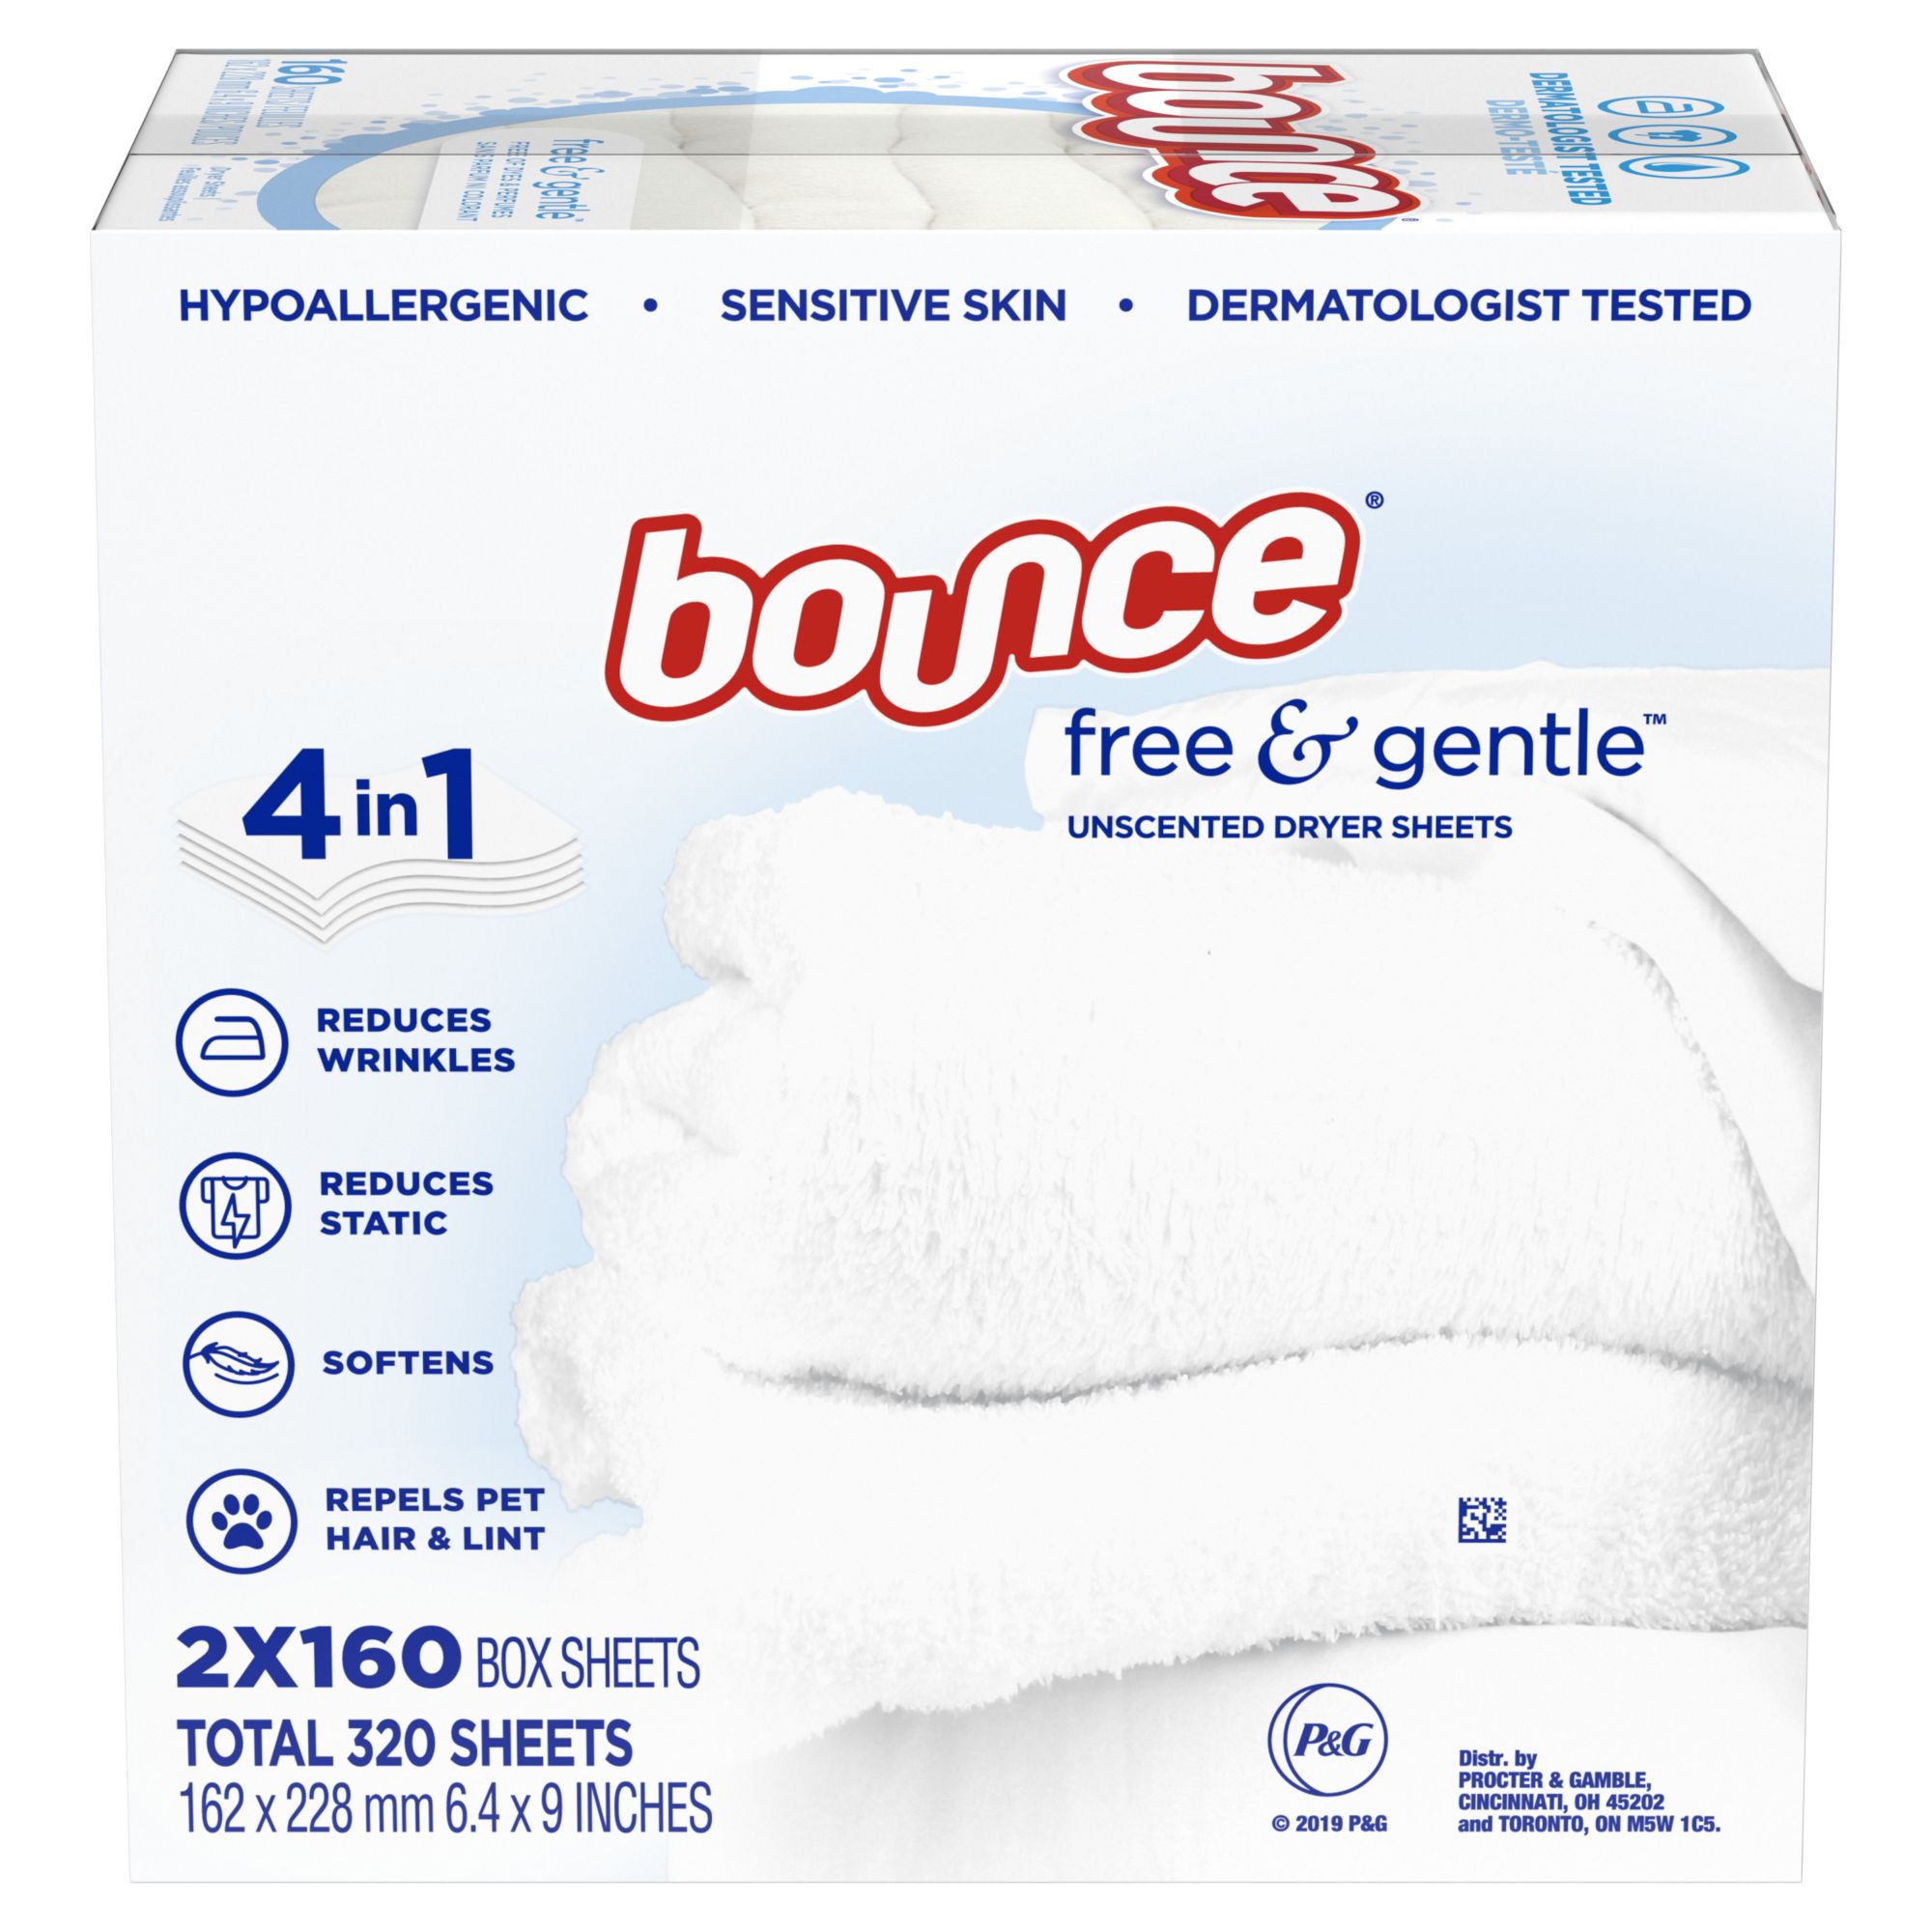 Bounce Free & Gentle, Fabric Softener Sheets, 80 Count